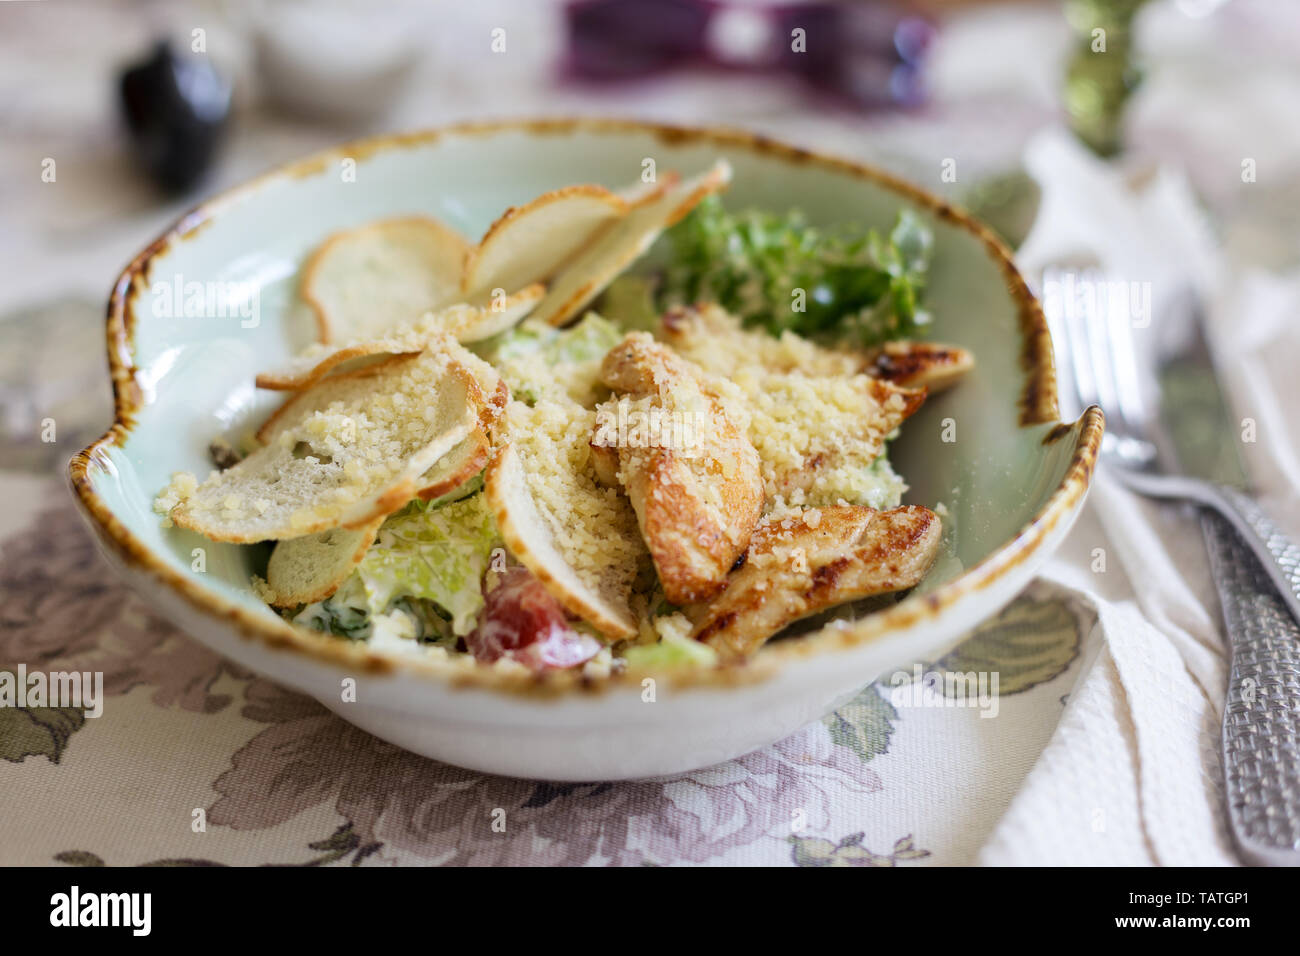 Cesar salad with romano, chicken breasts, croutons and fresh herbs on table. Concept of summer food Stock Photo